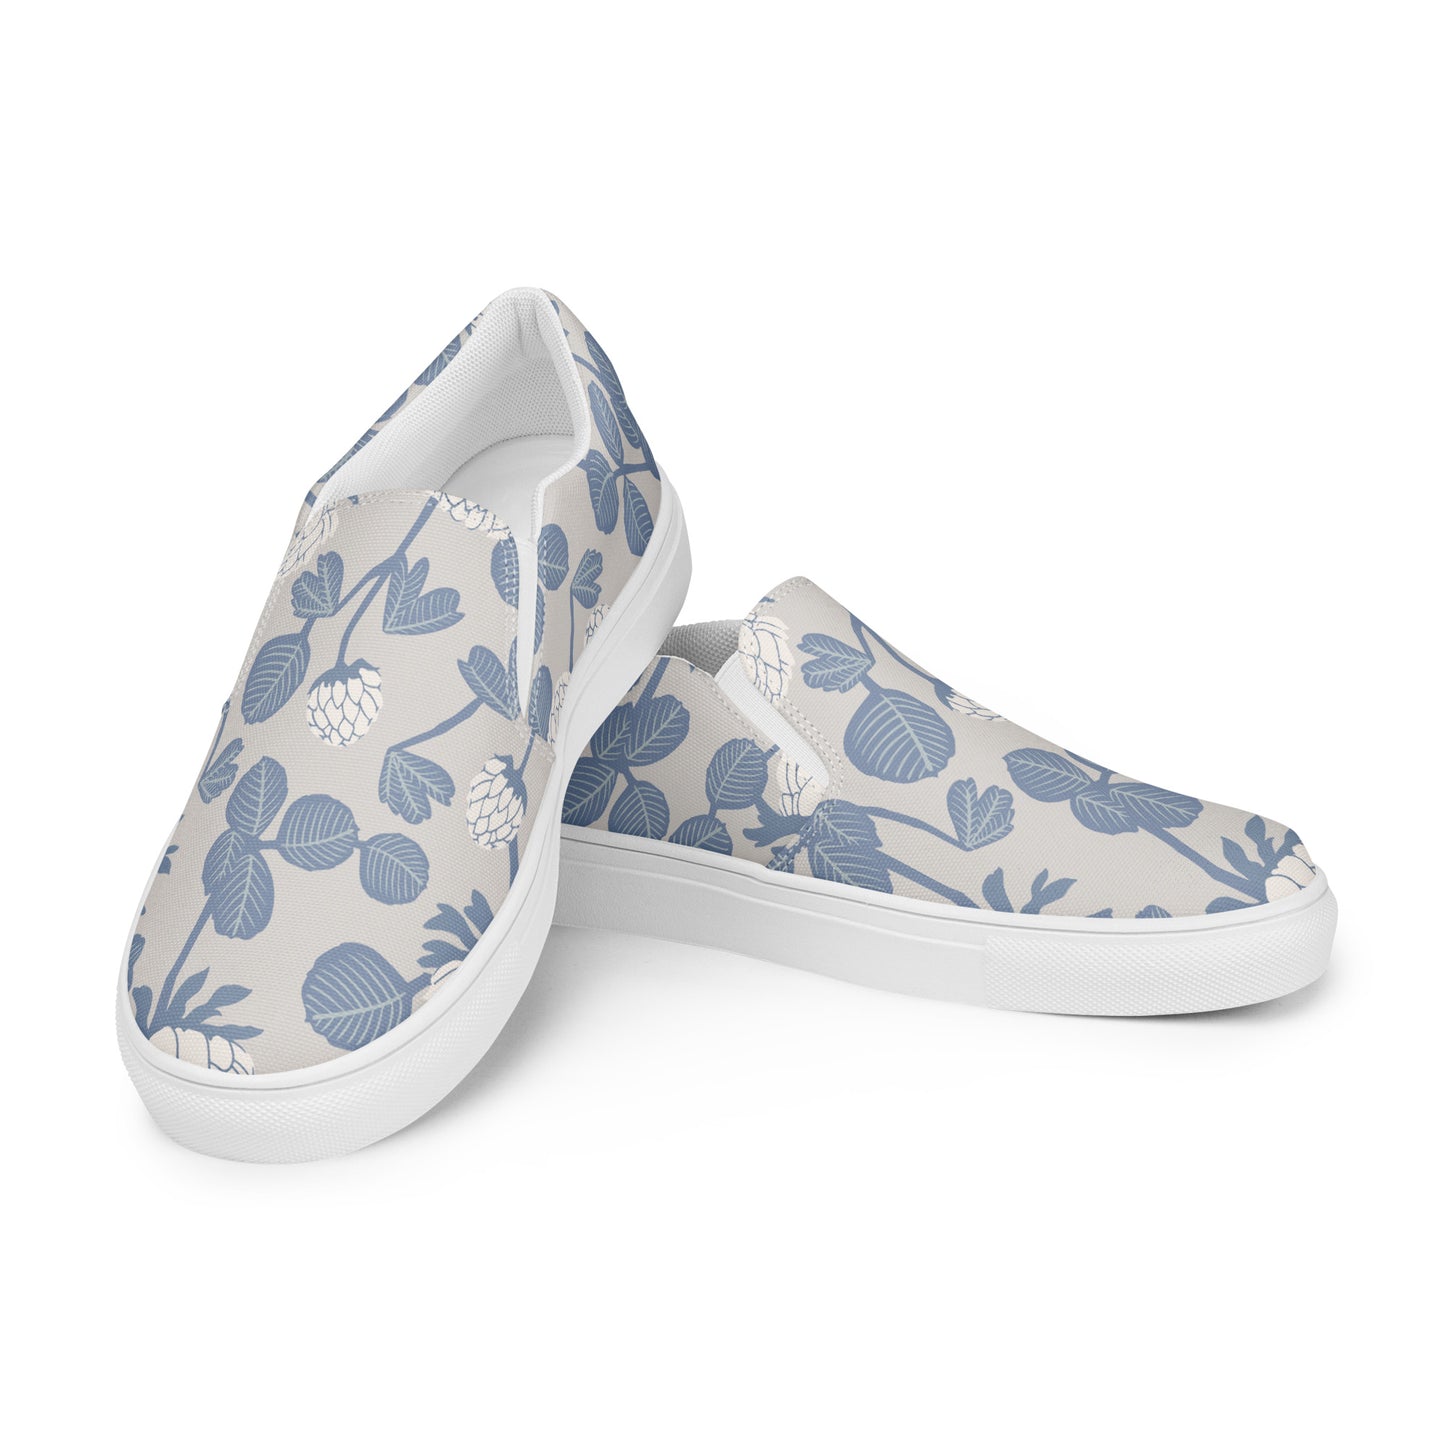 Grey Floral - Sustainably Made Women's  Slip-On Canvas Shoes